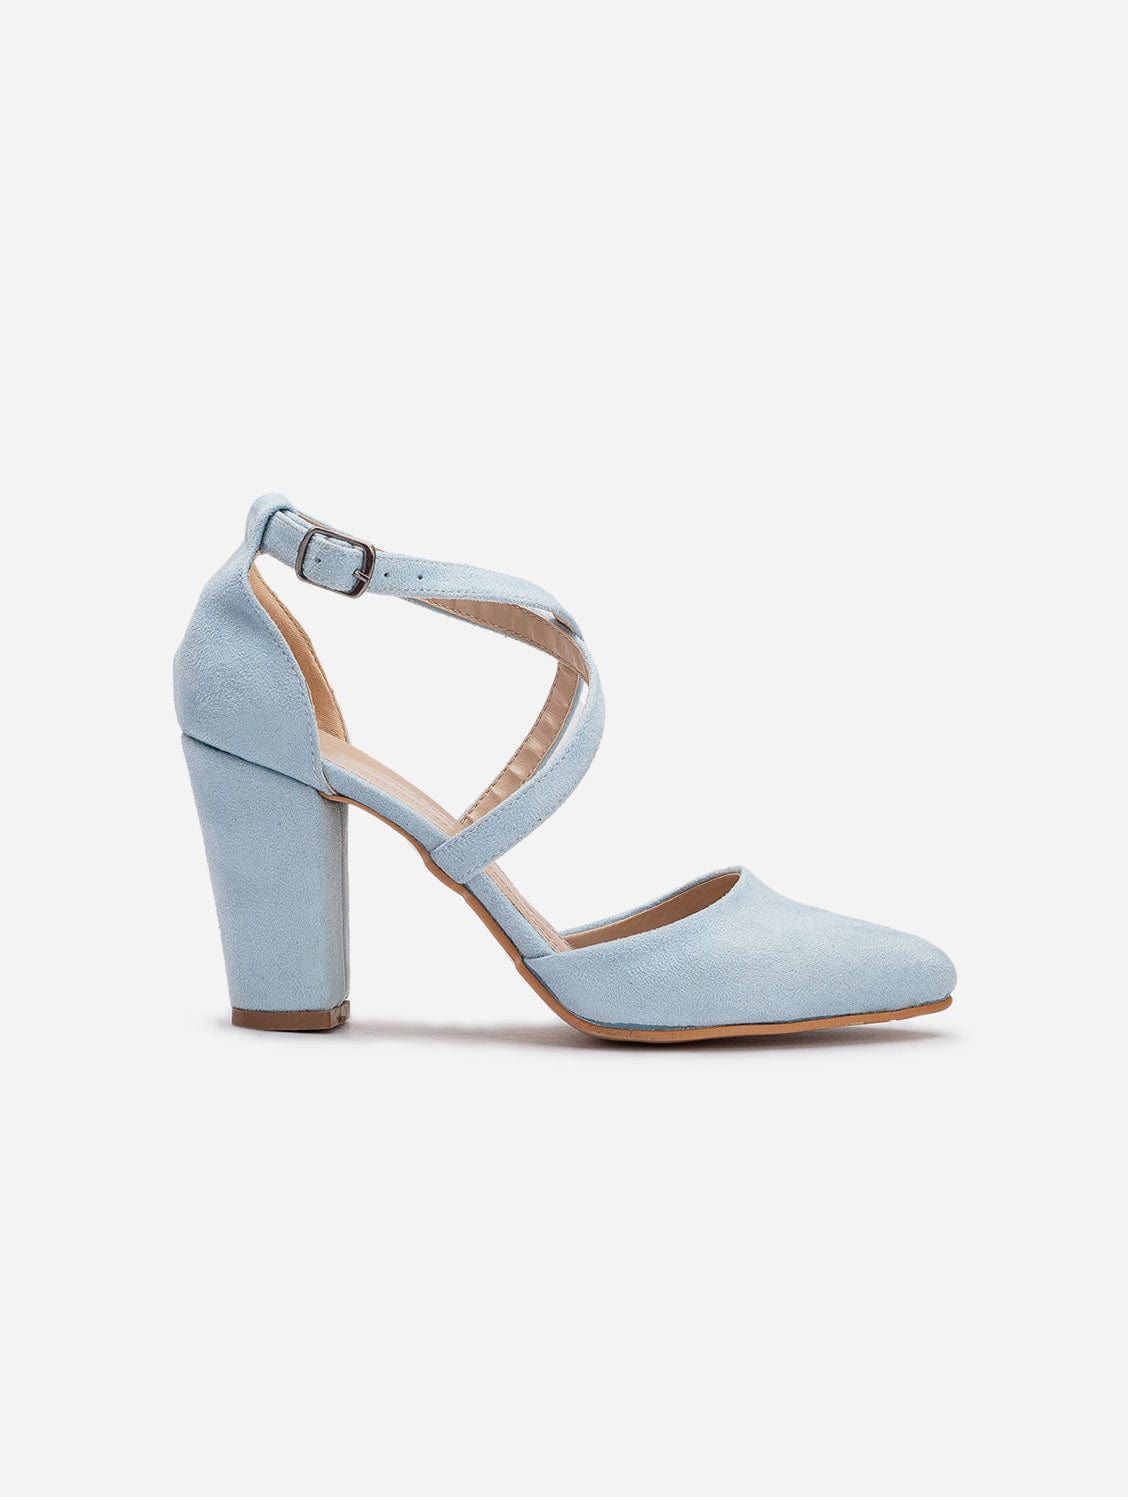 Prologue Shoes Sina - Baby Blue Wedding Shoes